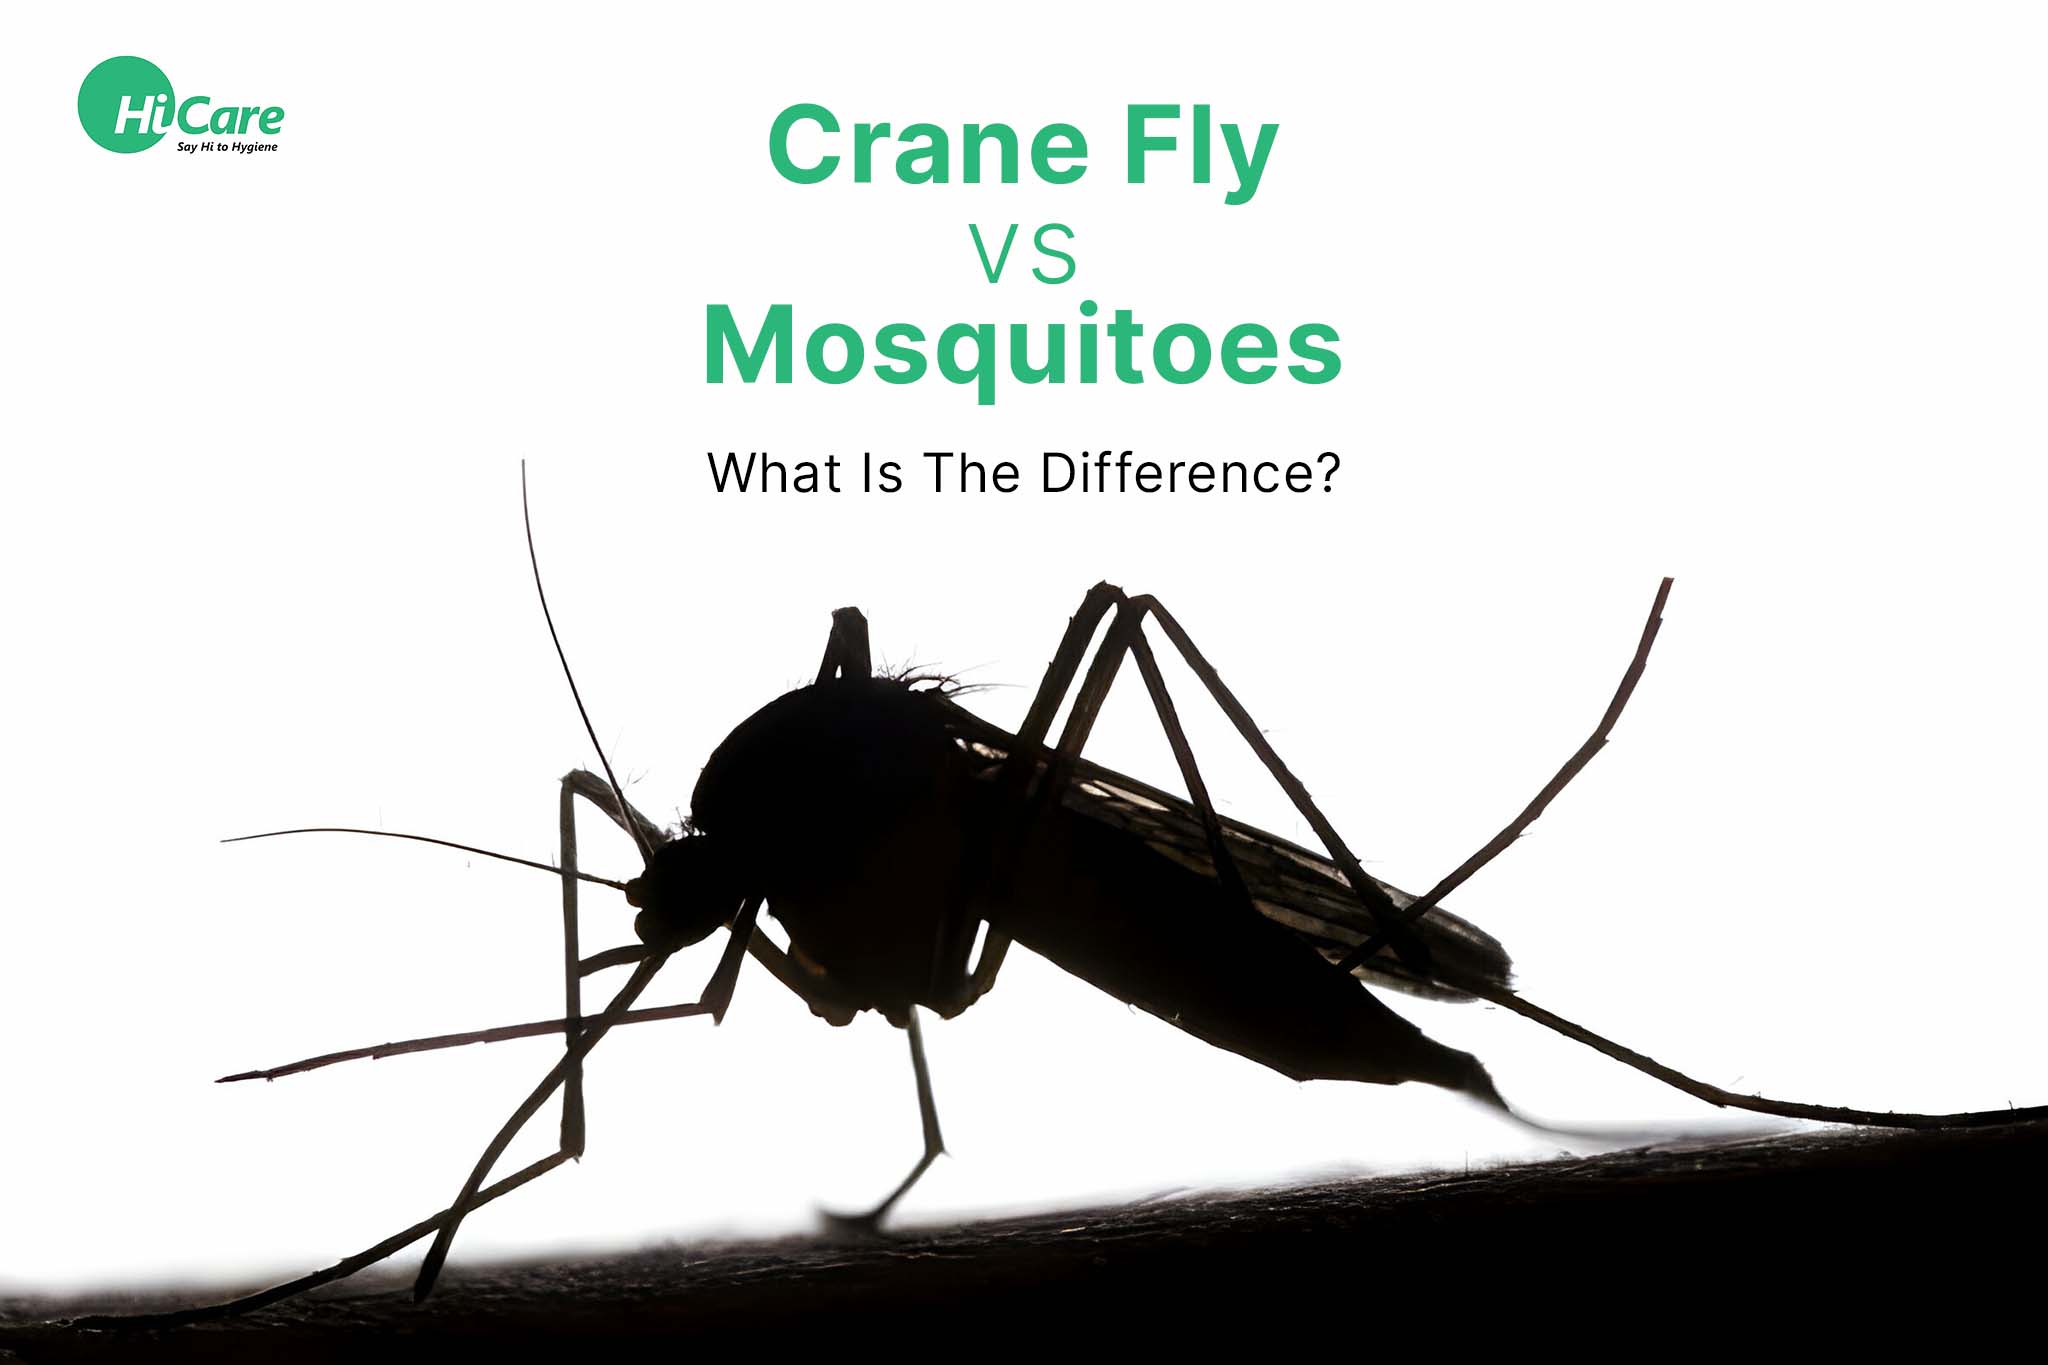 Crane Fly vs Mosquitoes: What Is The Difference?